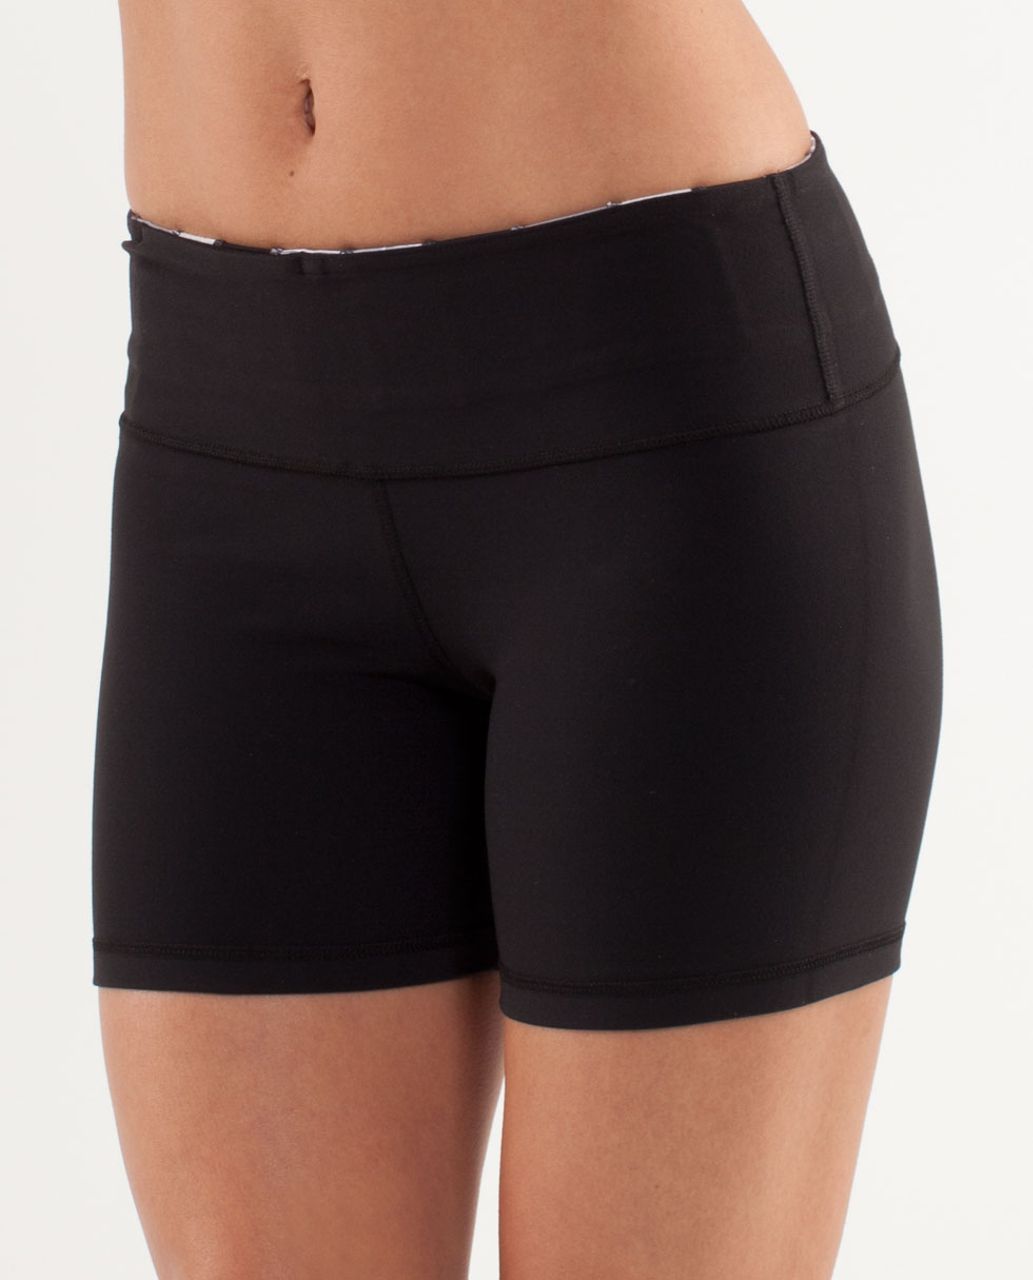 Lululemon Groove Short Black Luon Tight Fit Reversible Spanx Booty Shorts 2